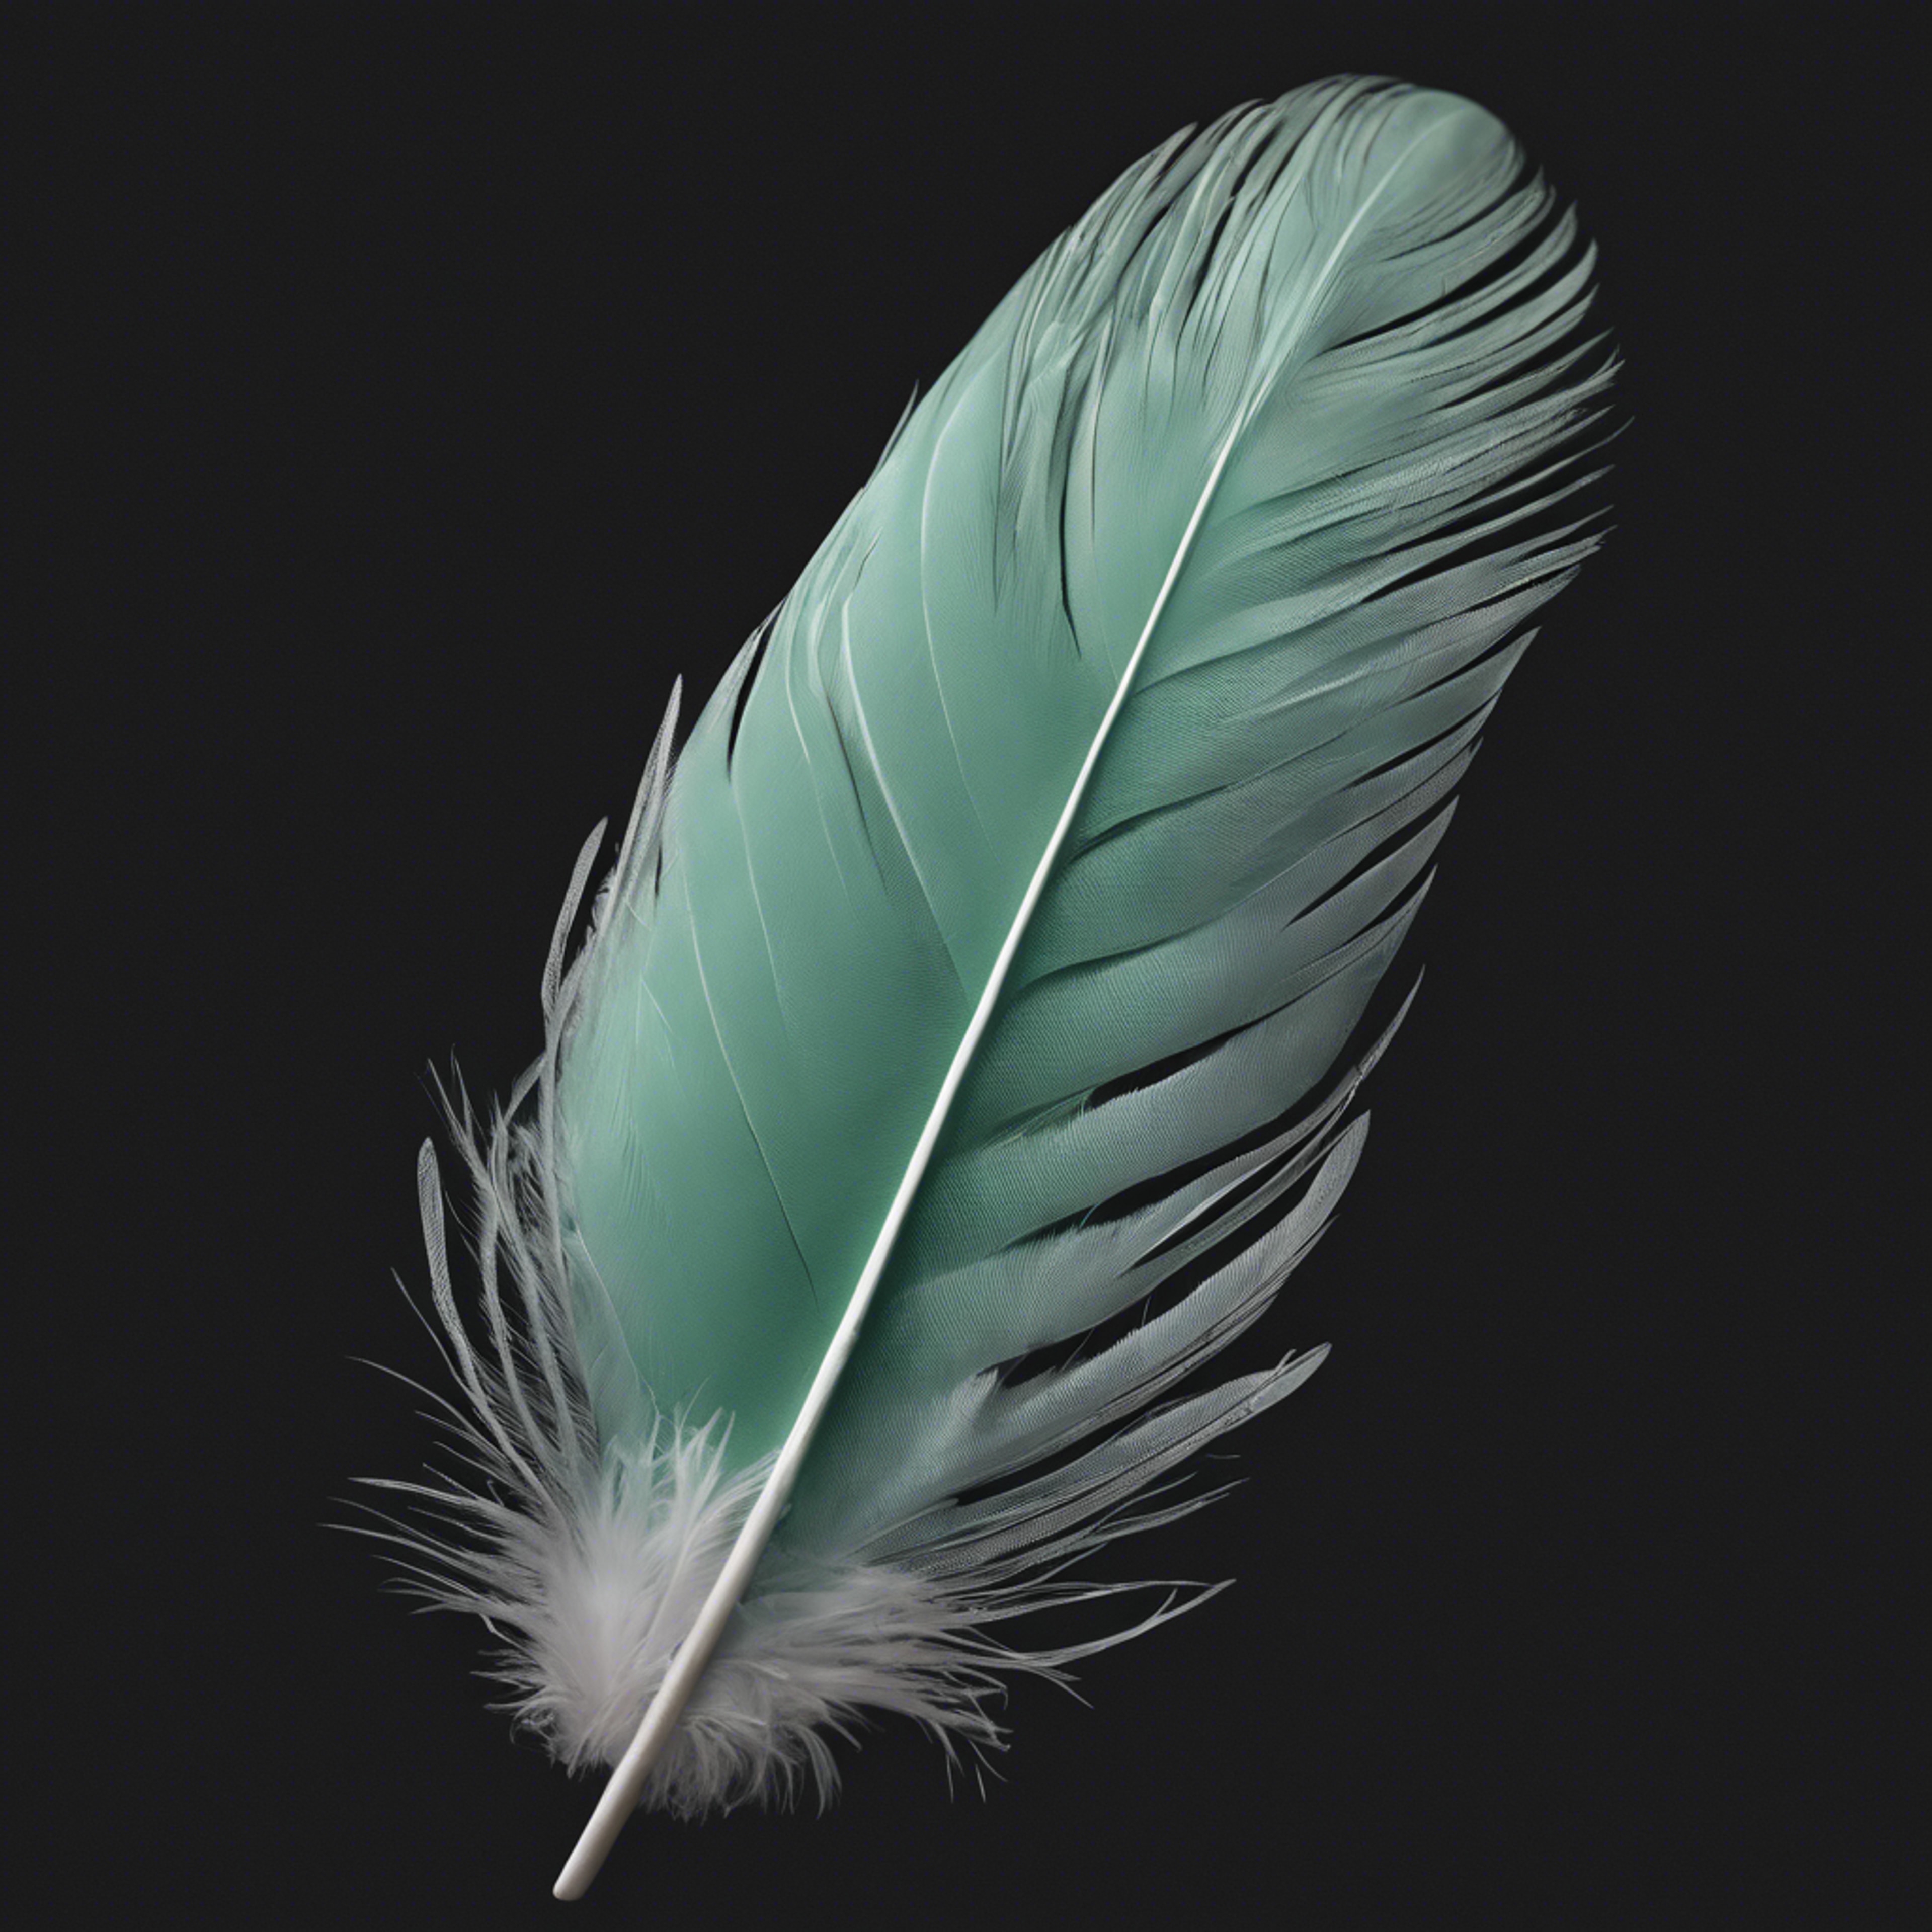 A mint green feather falling gently against a black background. Wallpaper[63059cc9c71342cdaeda]